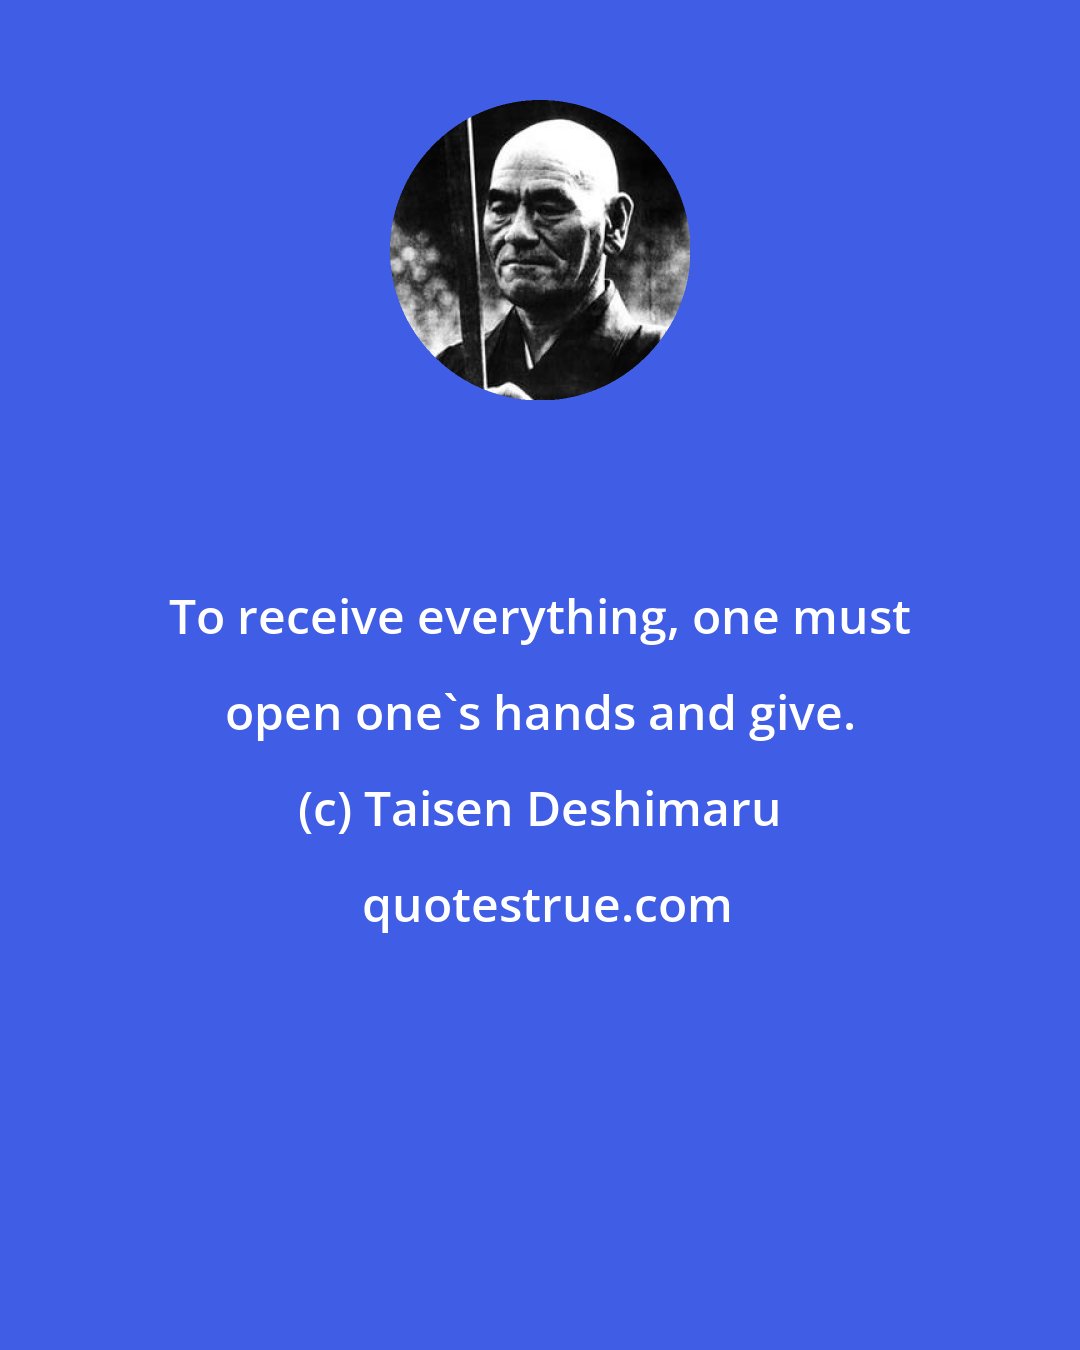 Taisen Deshimaru: To receive everything, one must open one's hands and give.